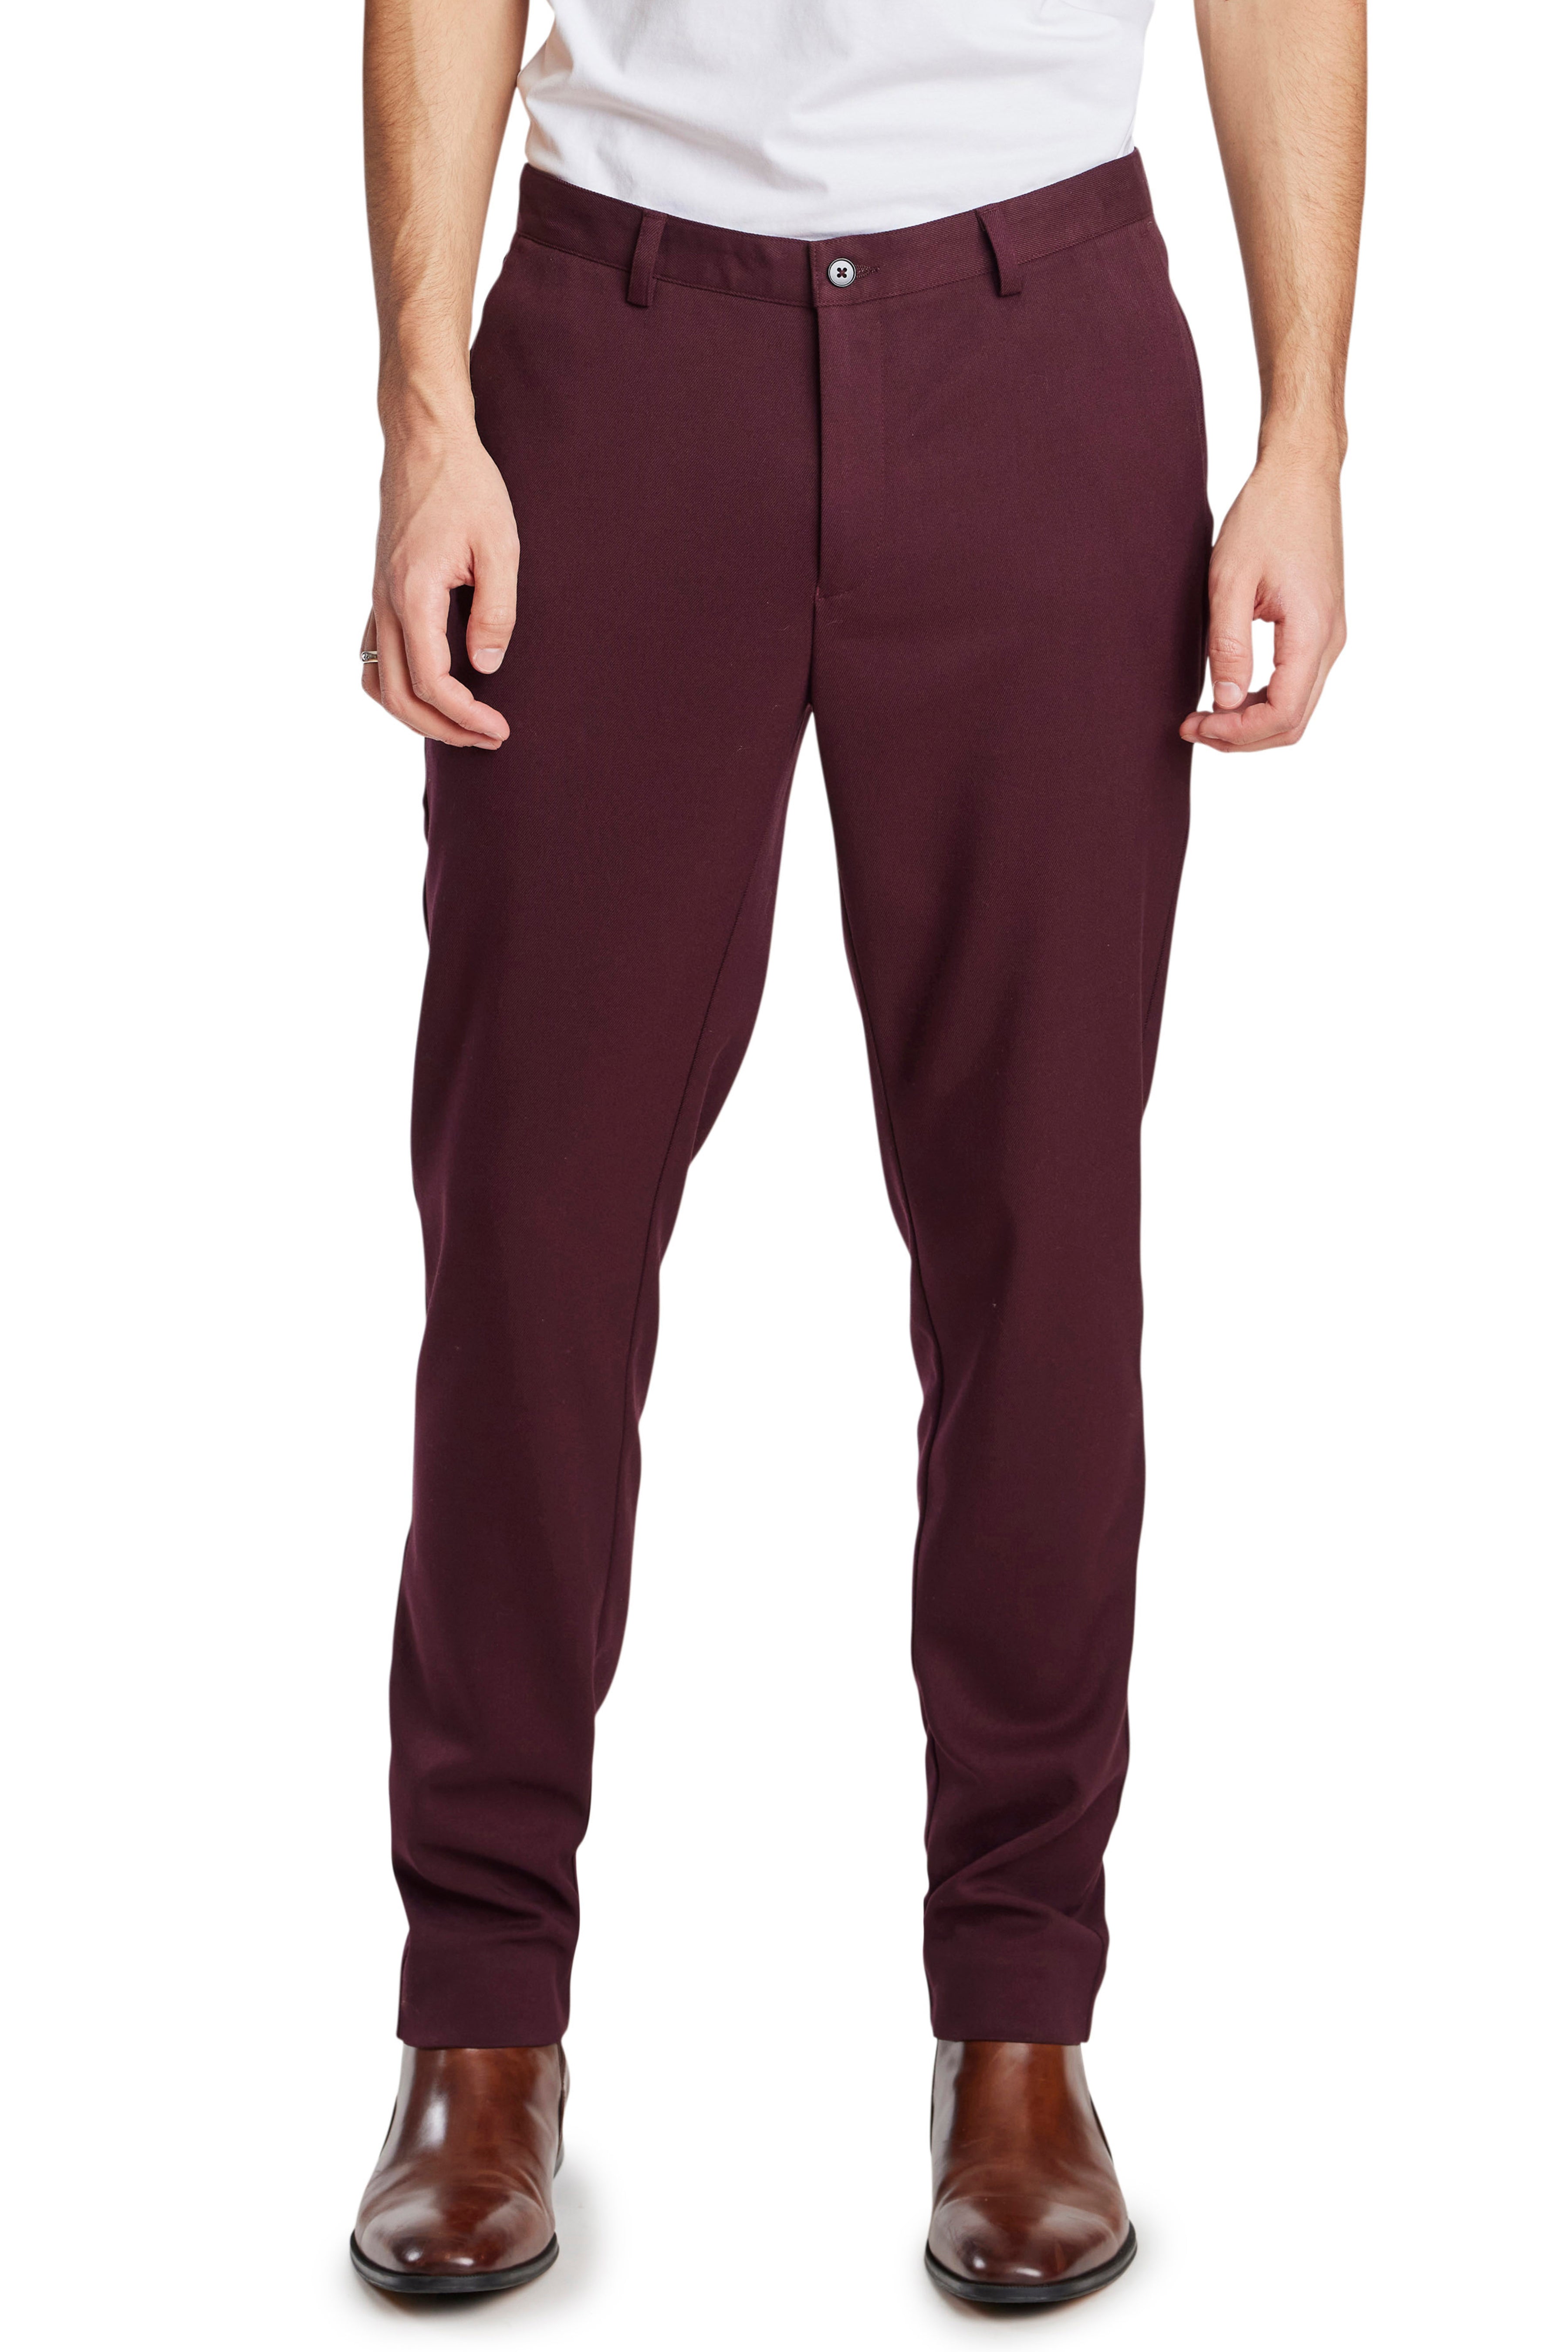 Grey Pants with Maroon Top Outfit - Putting Me Together